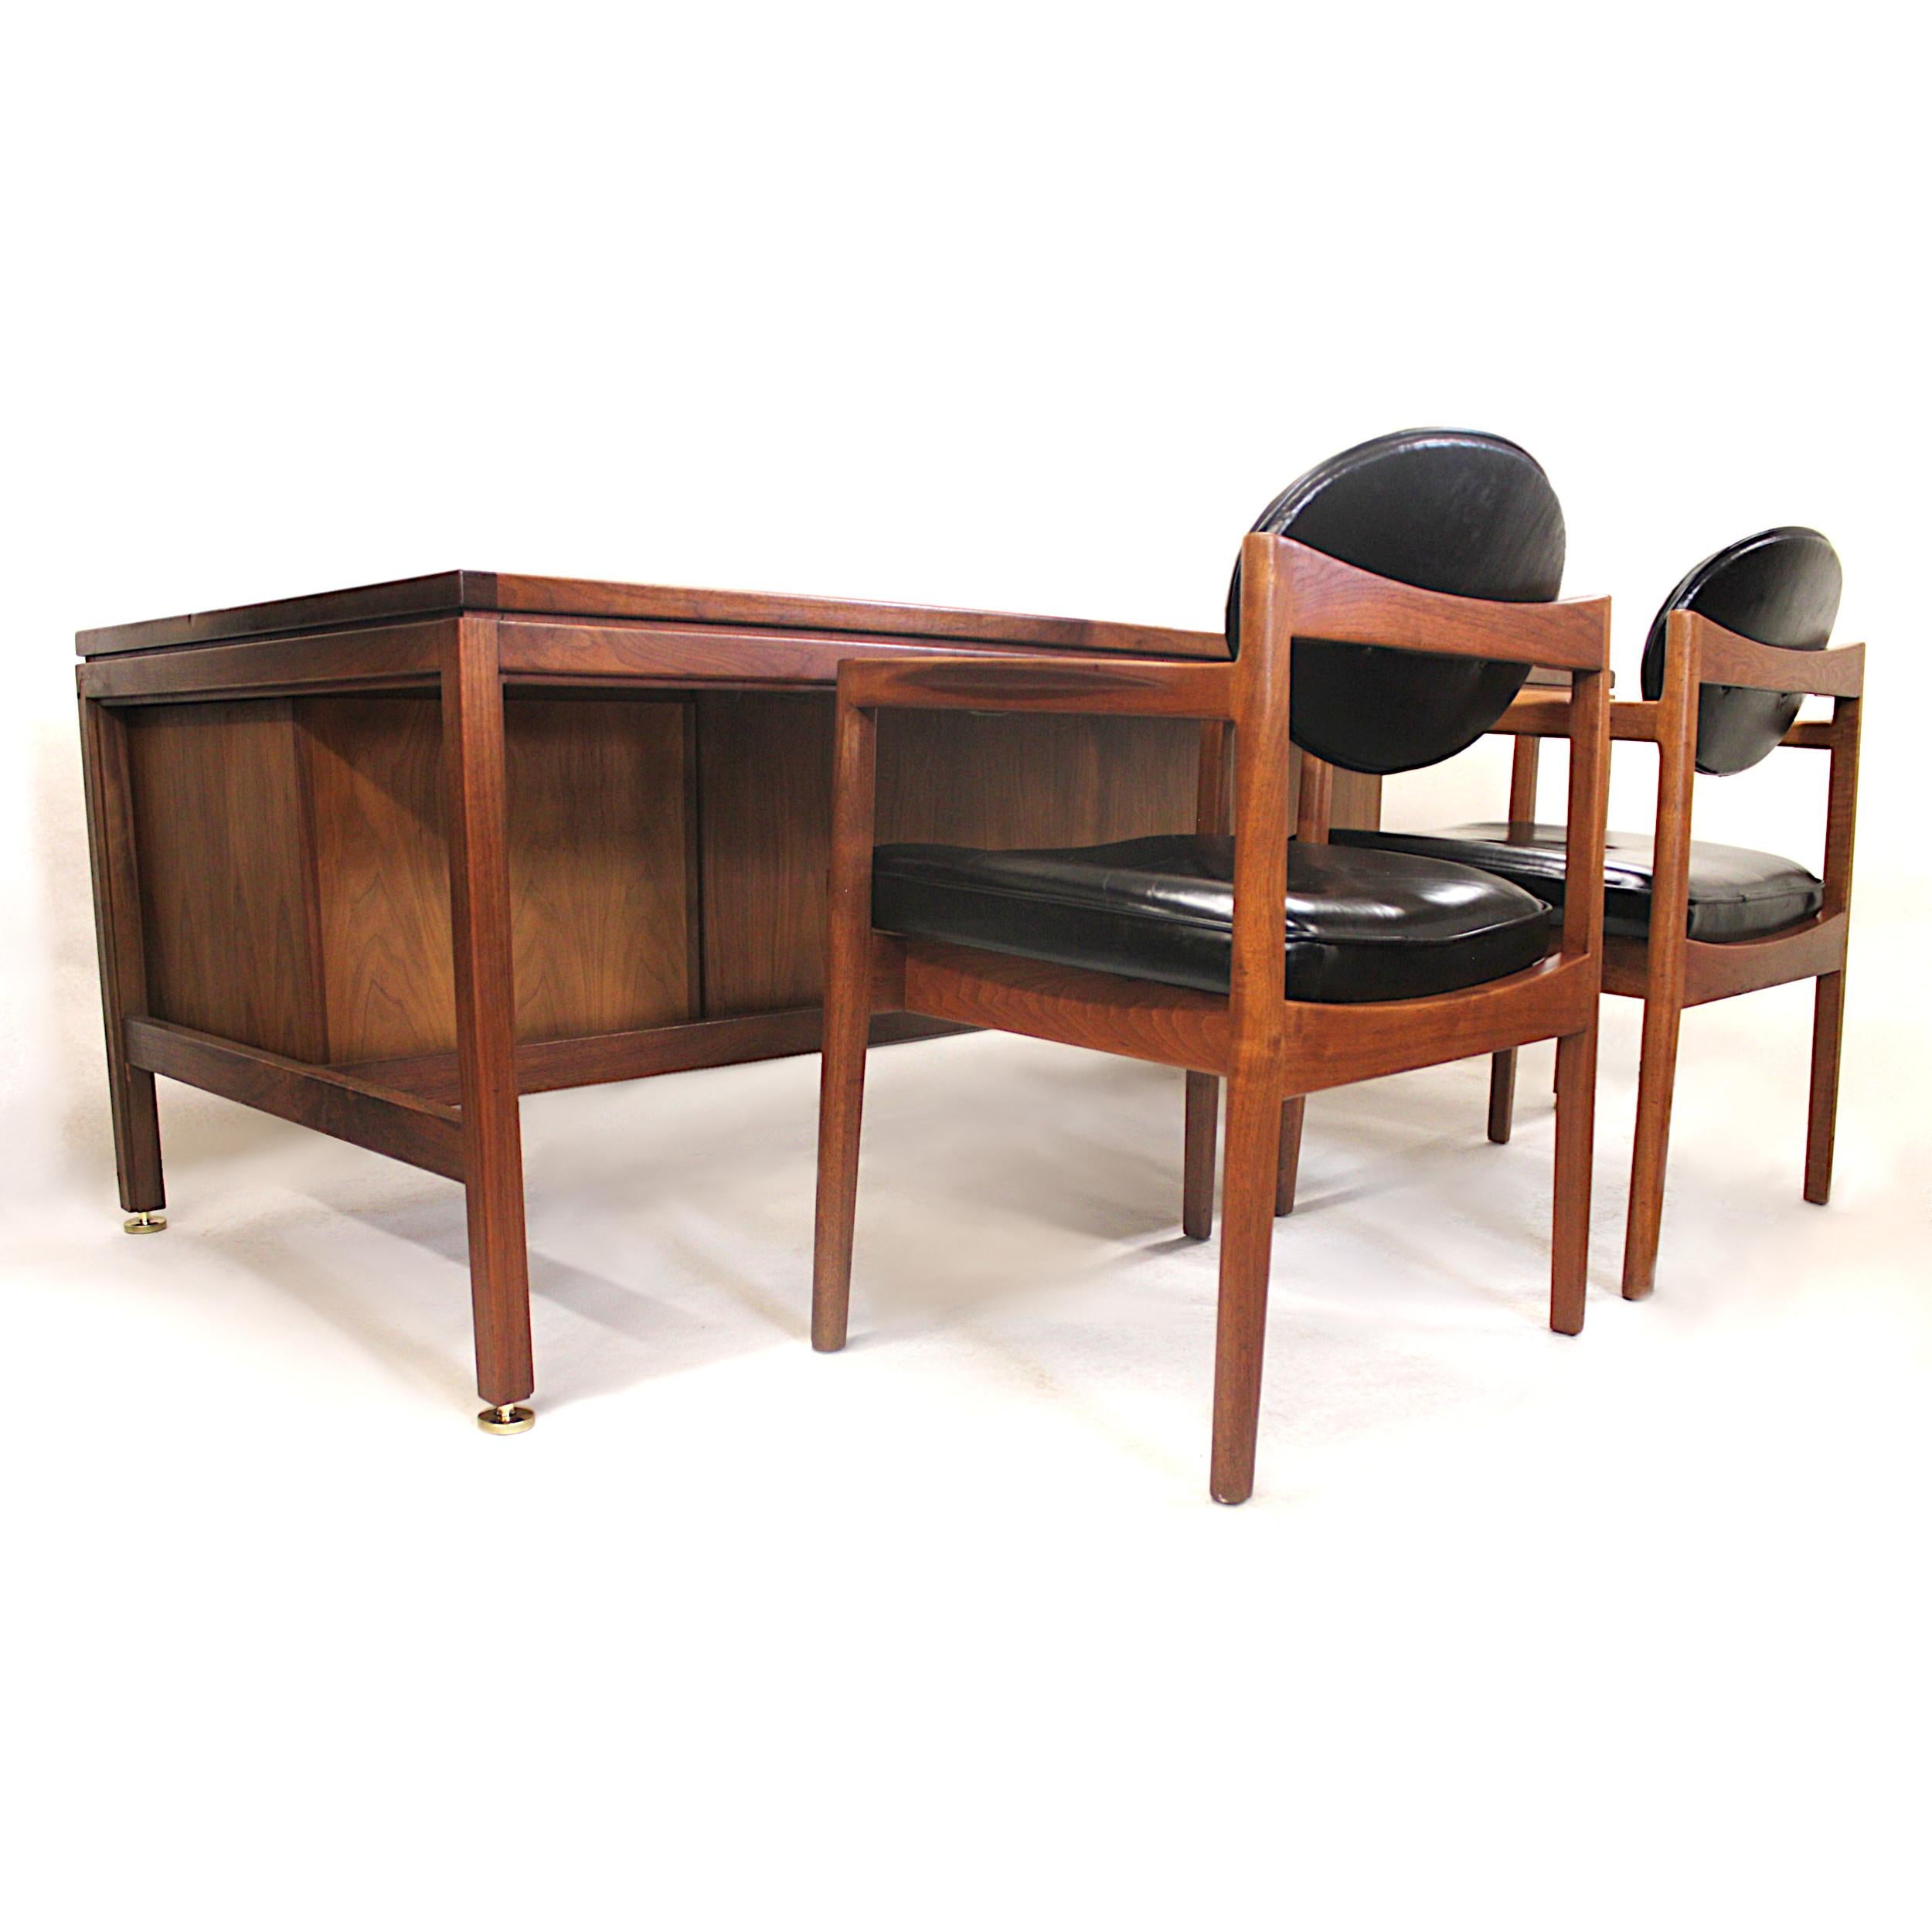 This wonderful office set by Jens Risom includes an imposing yet inviting executive desk and two matching guest chairs. The desk is in excellent original condition and includes many interesting details including; dual locking cabinets, solid brass